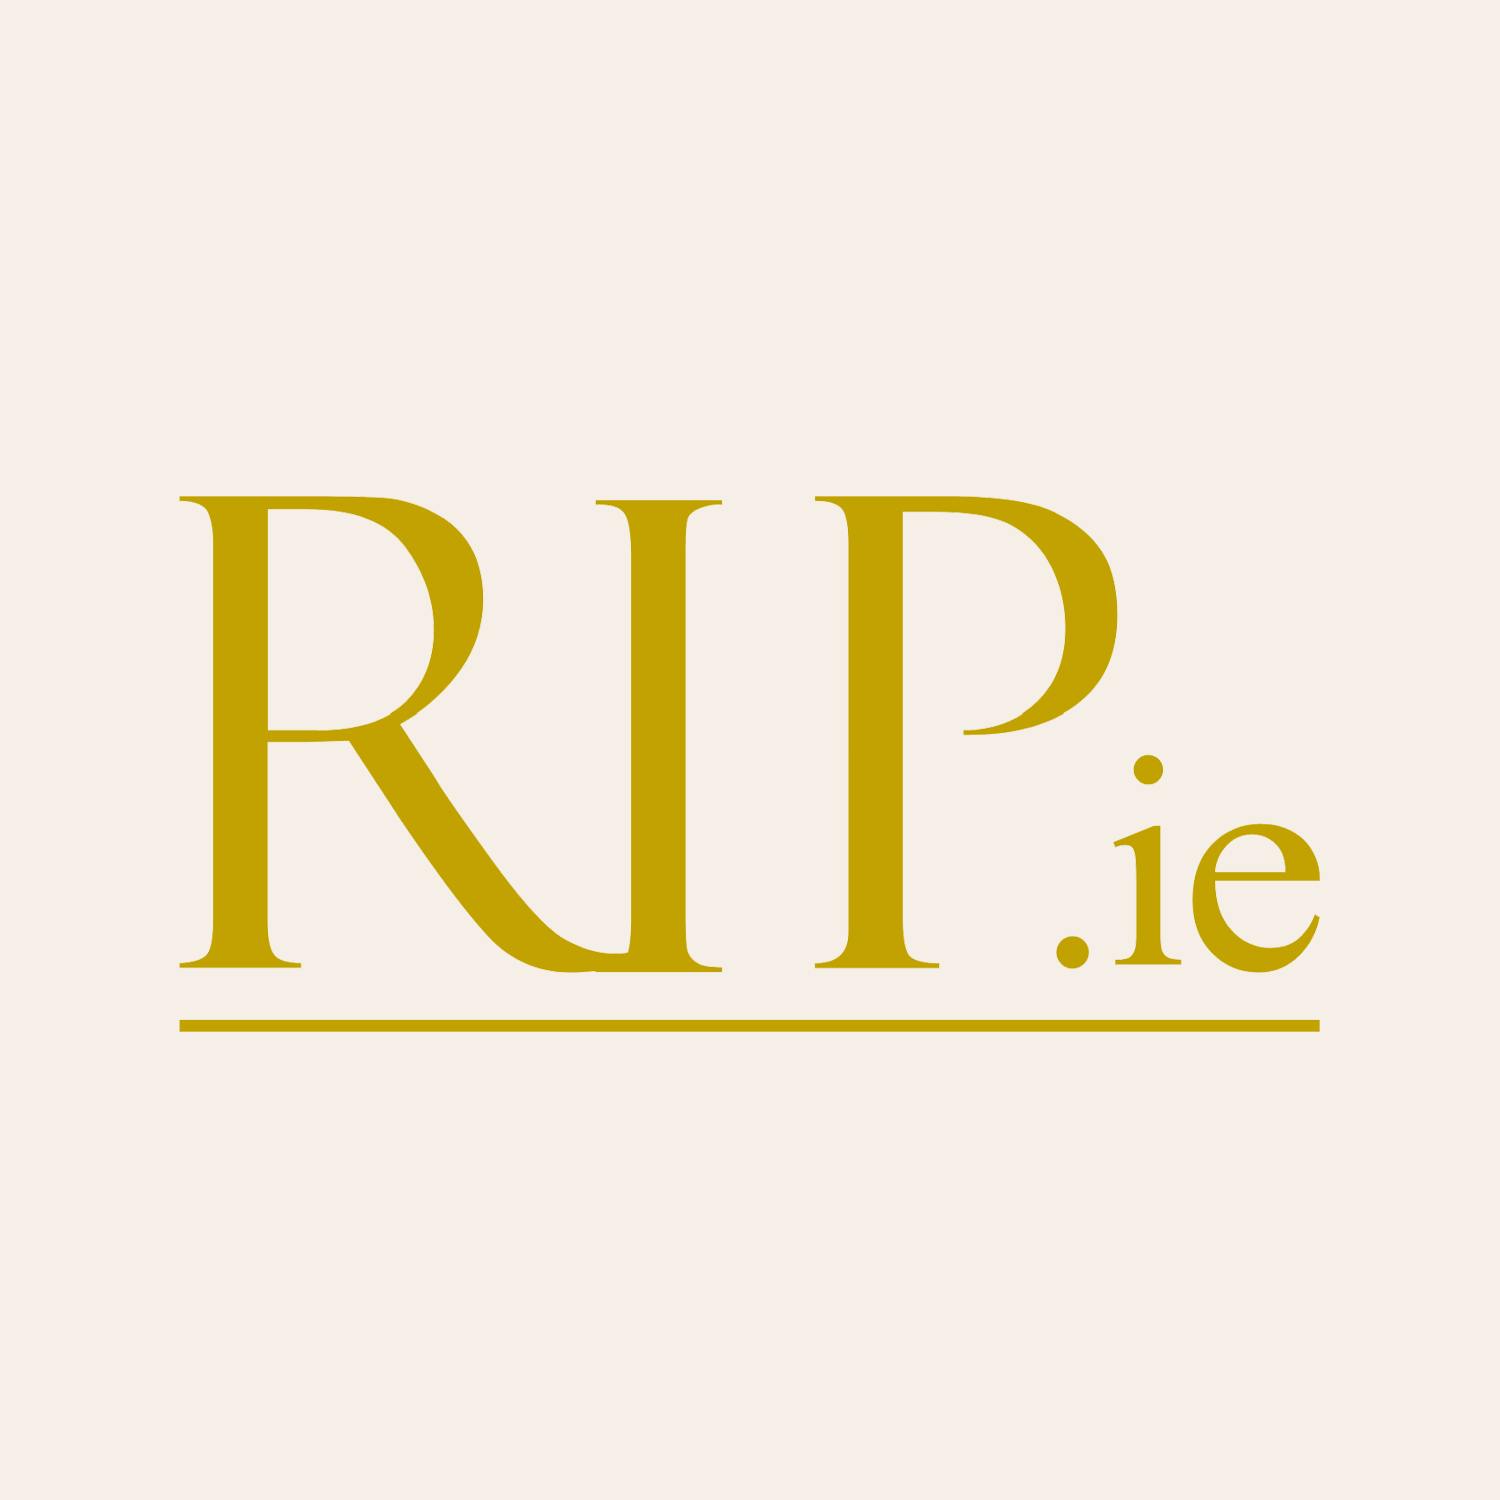 Why are Irish people obsessed with RIP.ie?